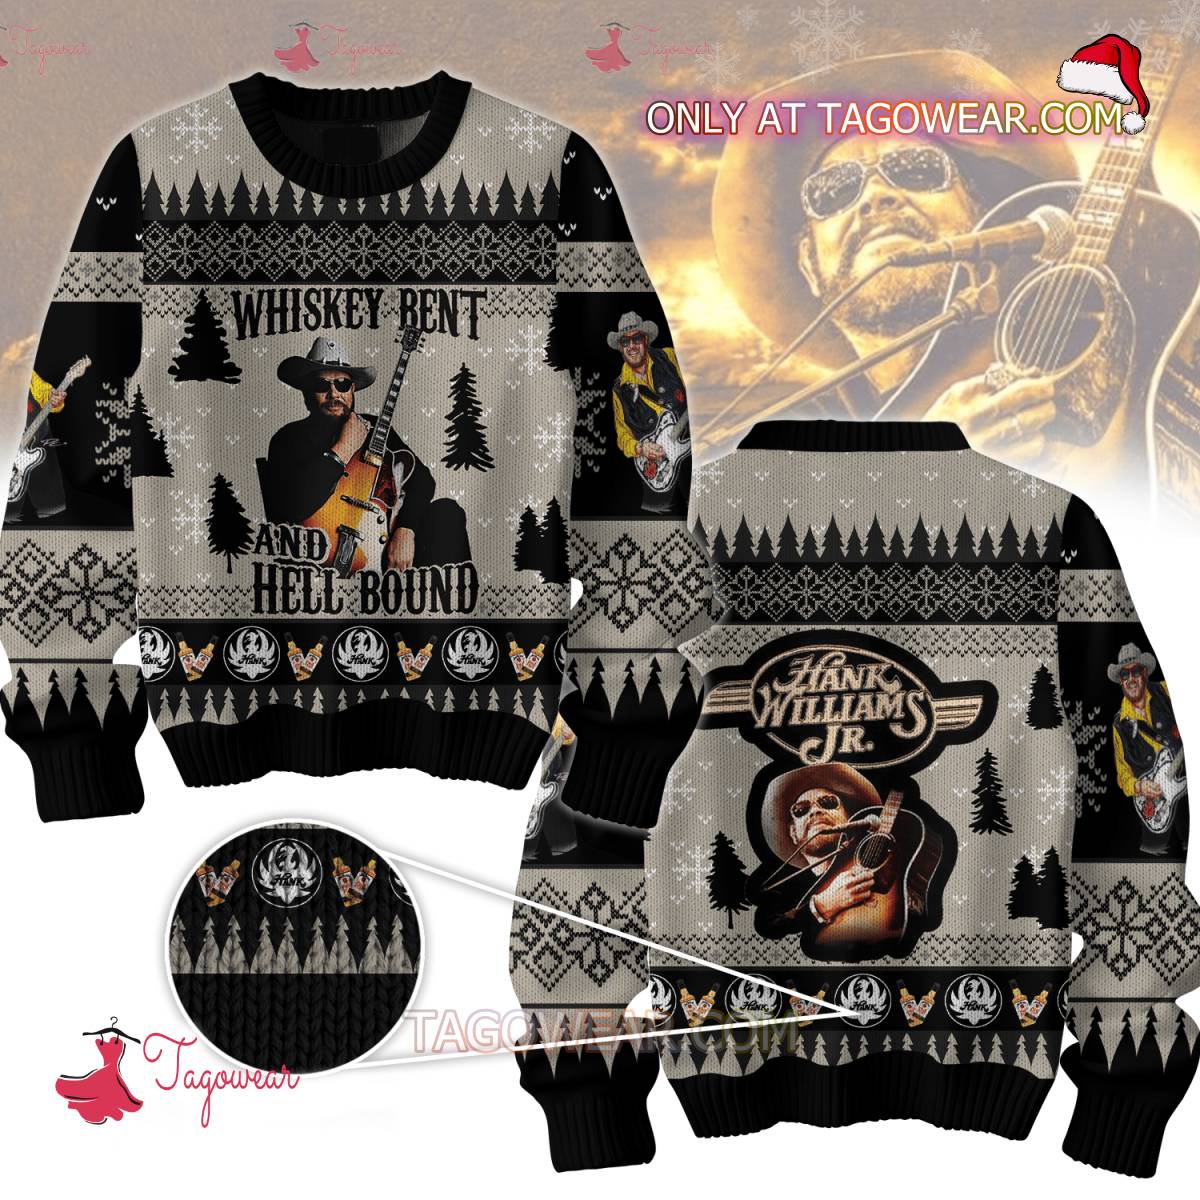 Hank Williams Jr. Whiskey Bent And Hell Bound Ugly Christmas Sweater